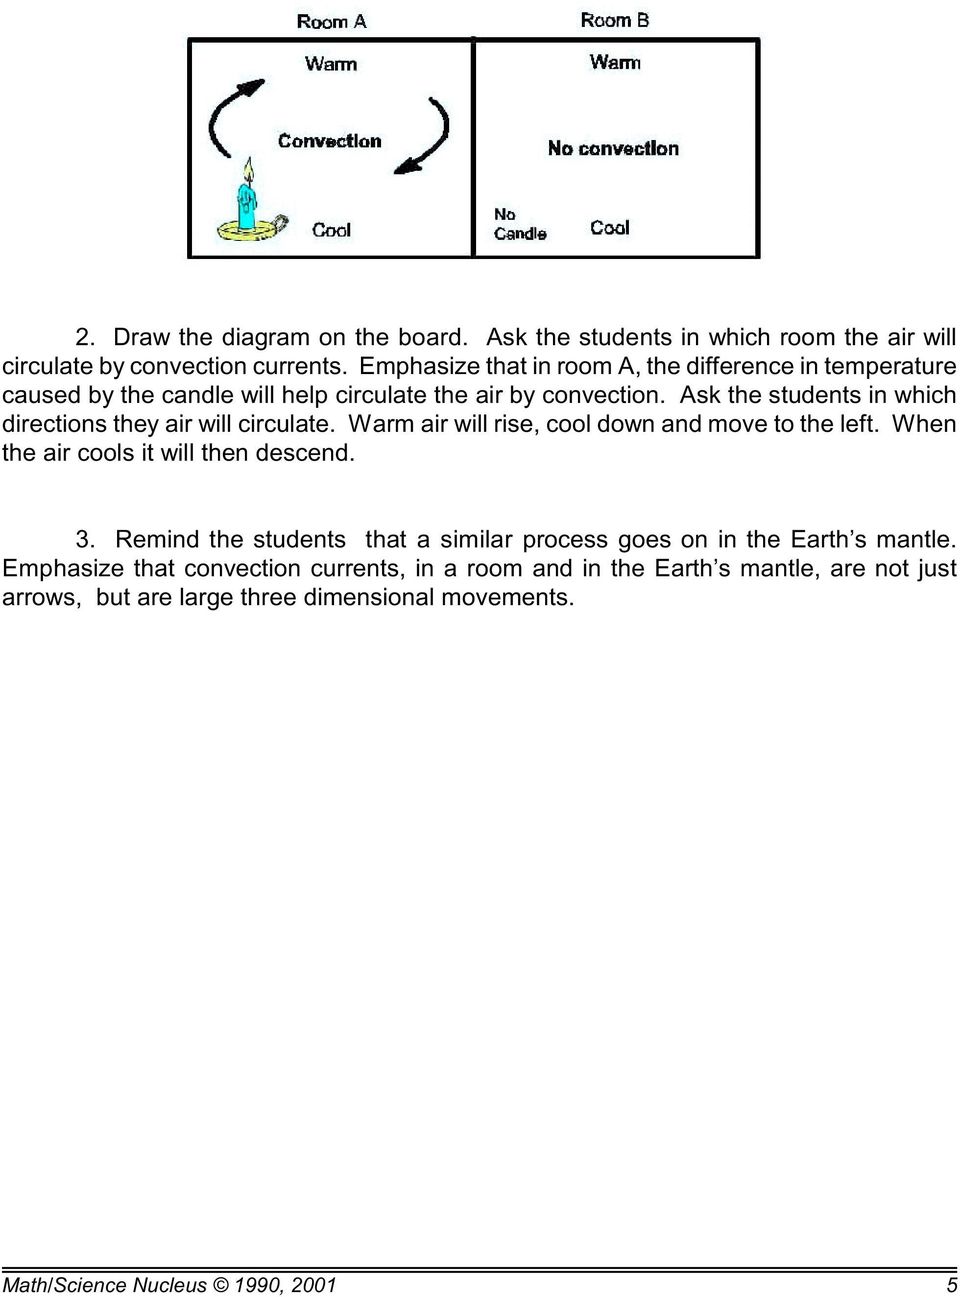 Ask the students in which directions they air will circulate. Warm air will rise, cool down and move to the left. When the air cools it will then descend. 3.